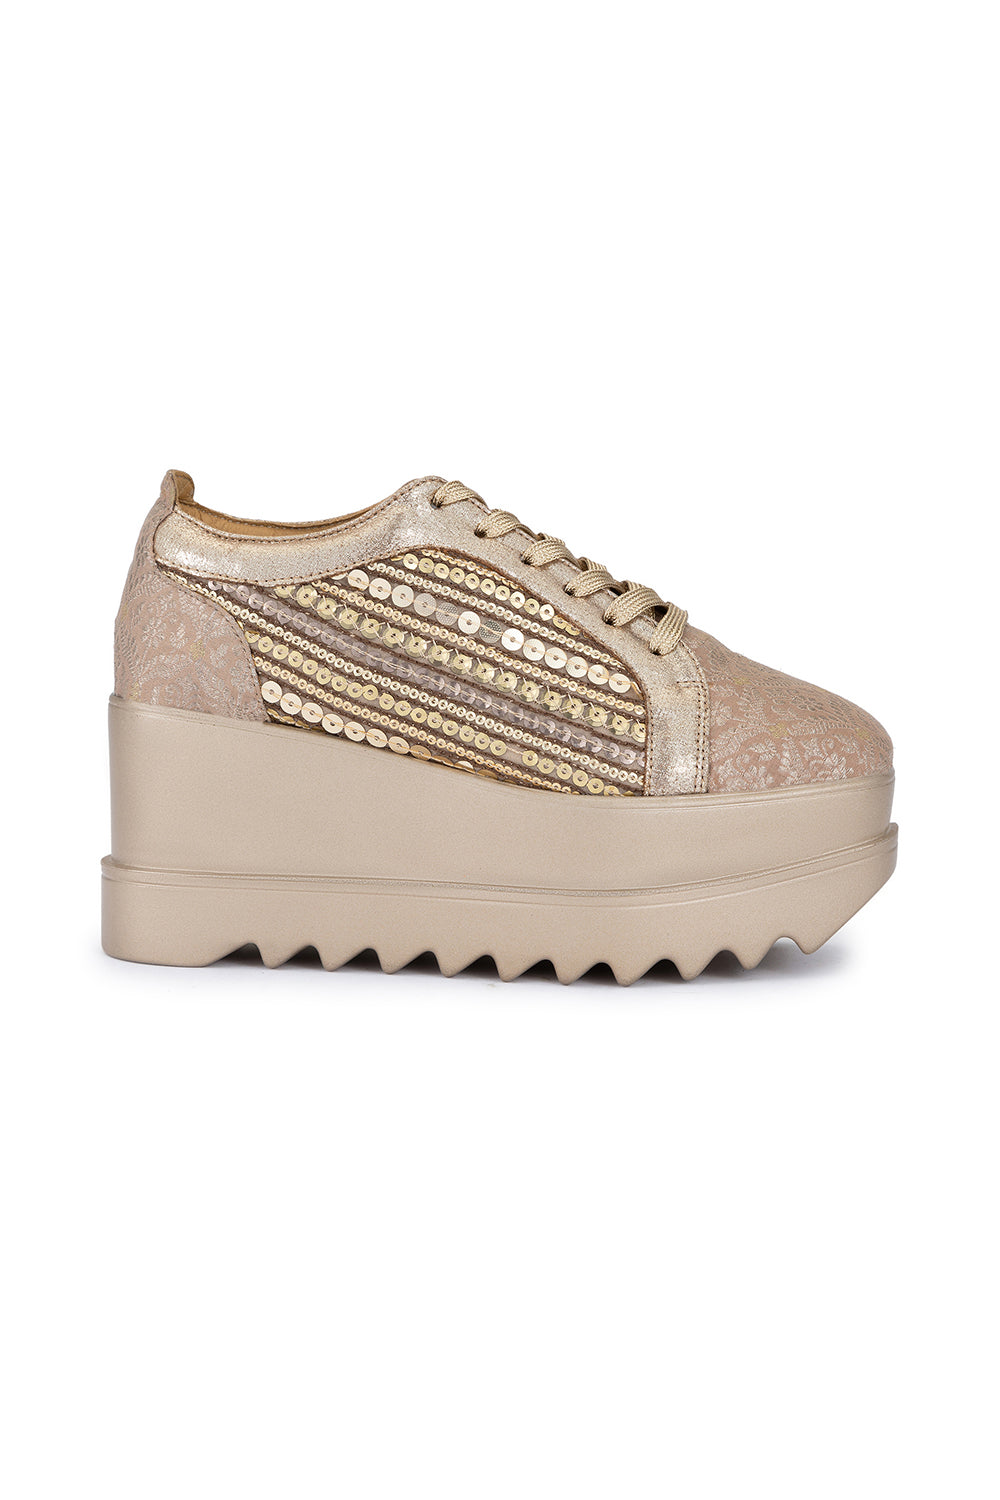 Rose Gold Gatsby Wedge Sneakers